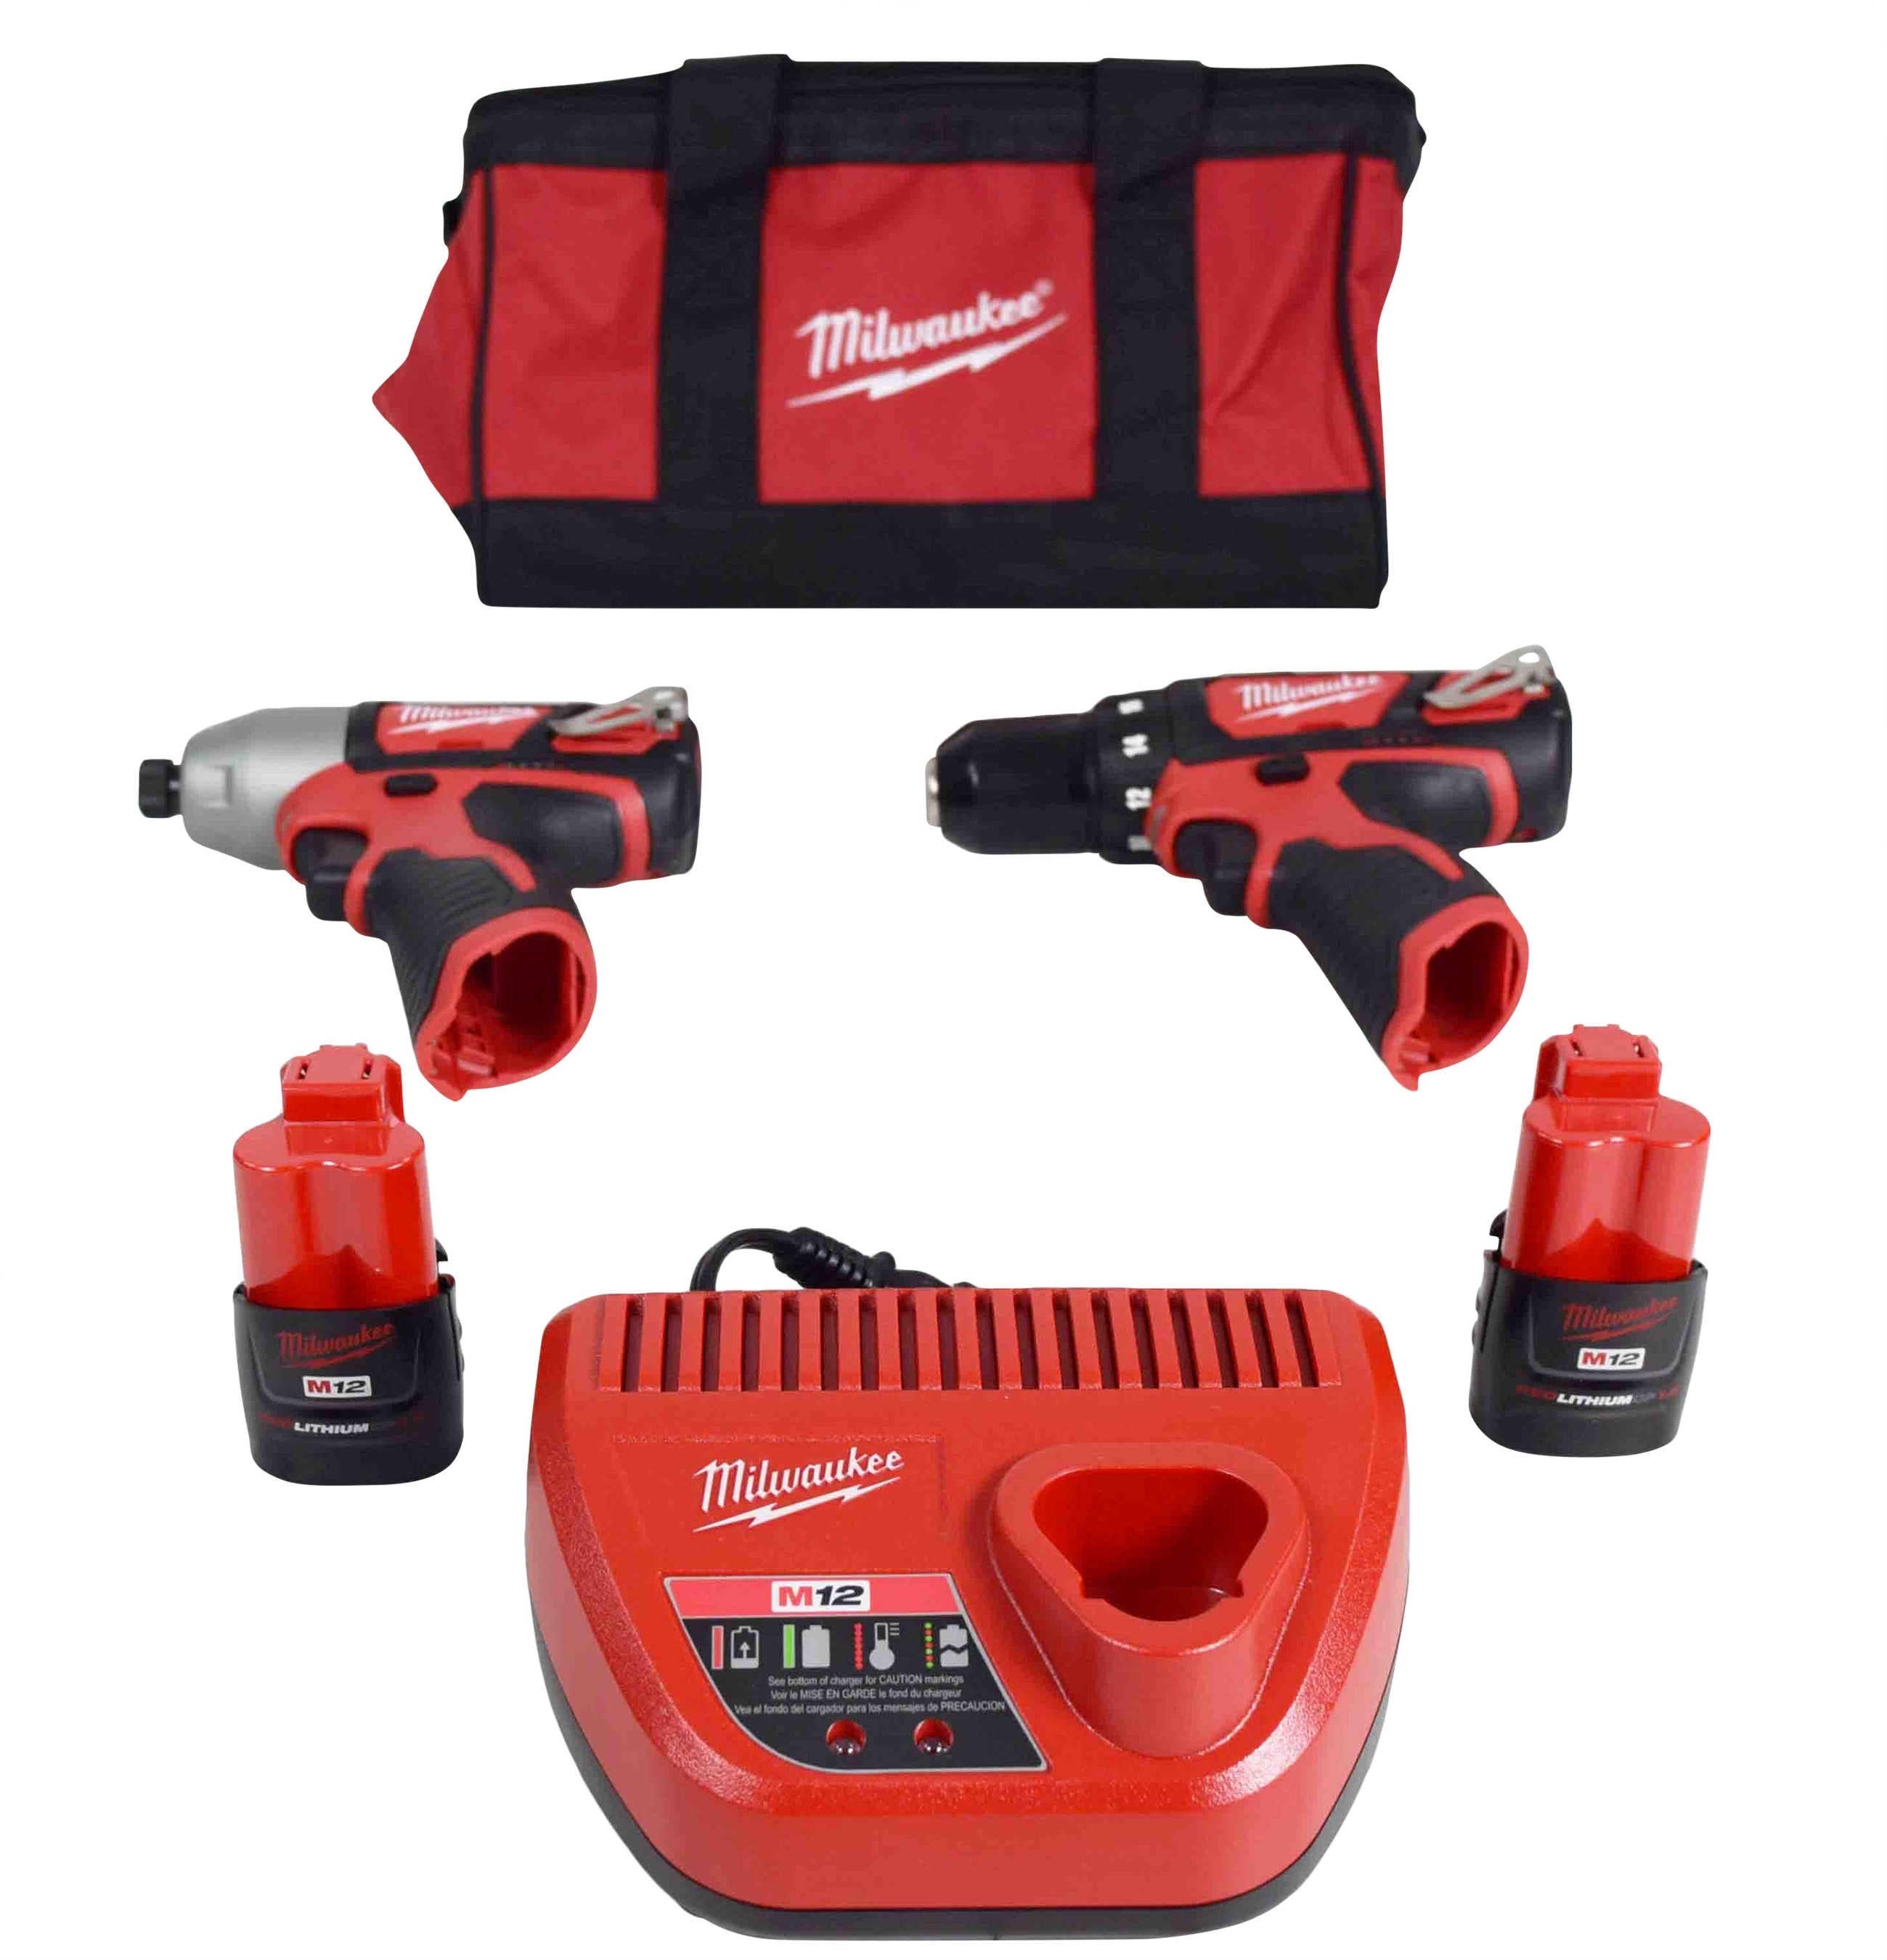 Milwaukee 2494-22 M12 Cordless Combination 3/8" Drill / Driver and 1/4" Hex Impact Driver Dual Power Tool Kit (2 Lithium Ion Batteries, Charger, and Bag Included)